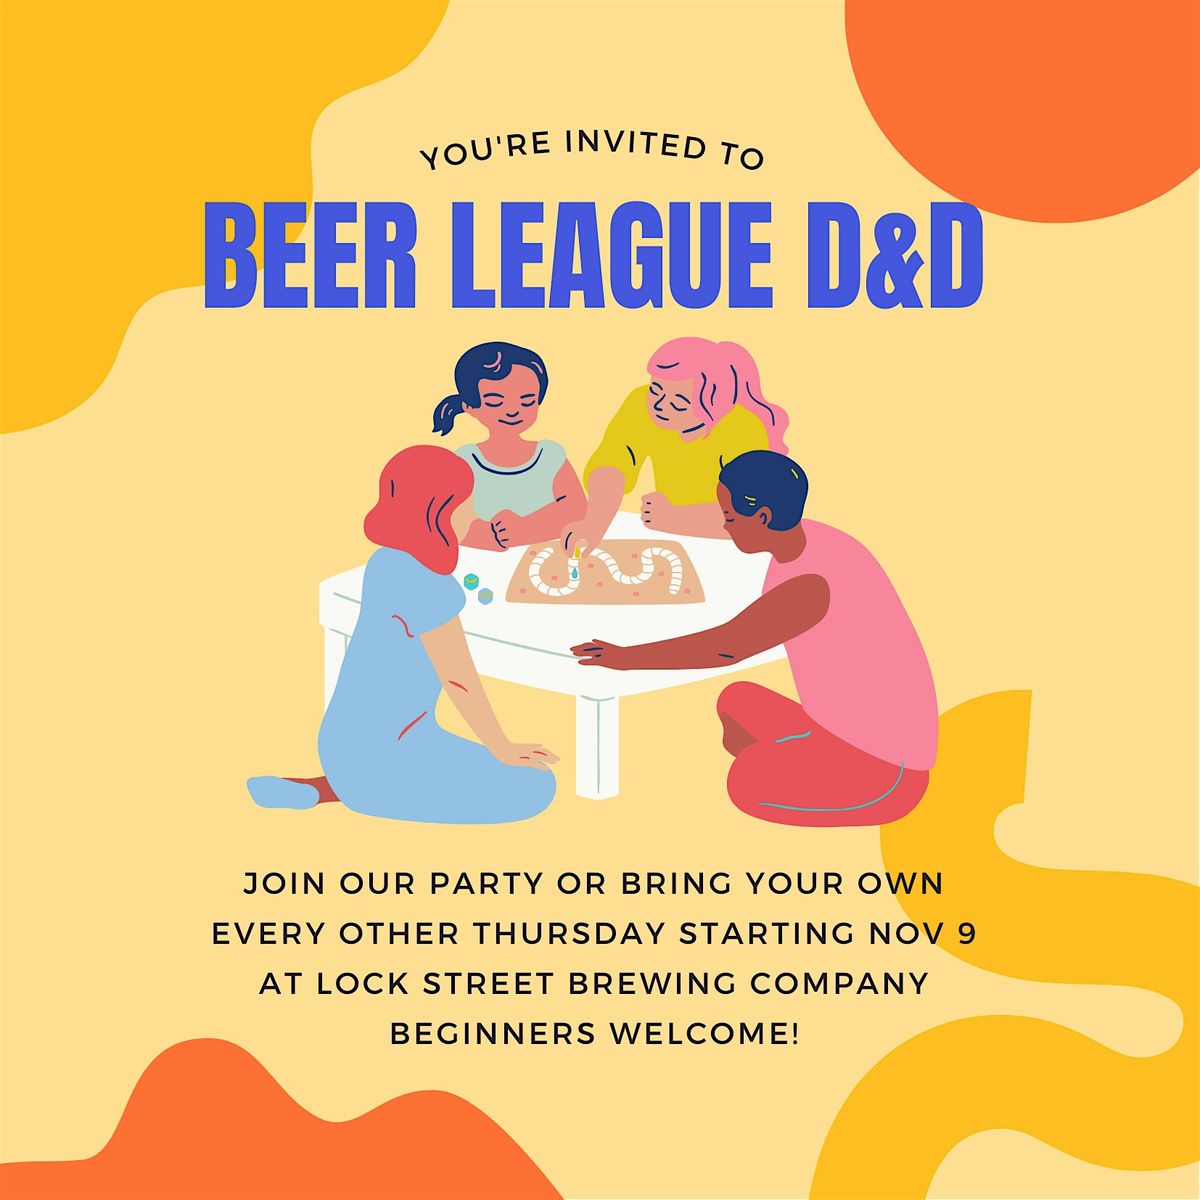 Beer League Dungeons and Dragons